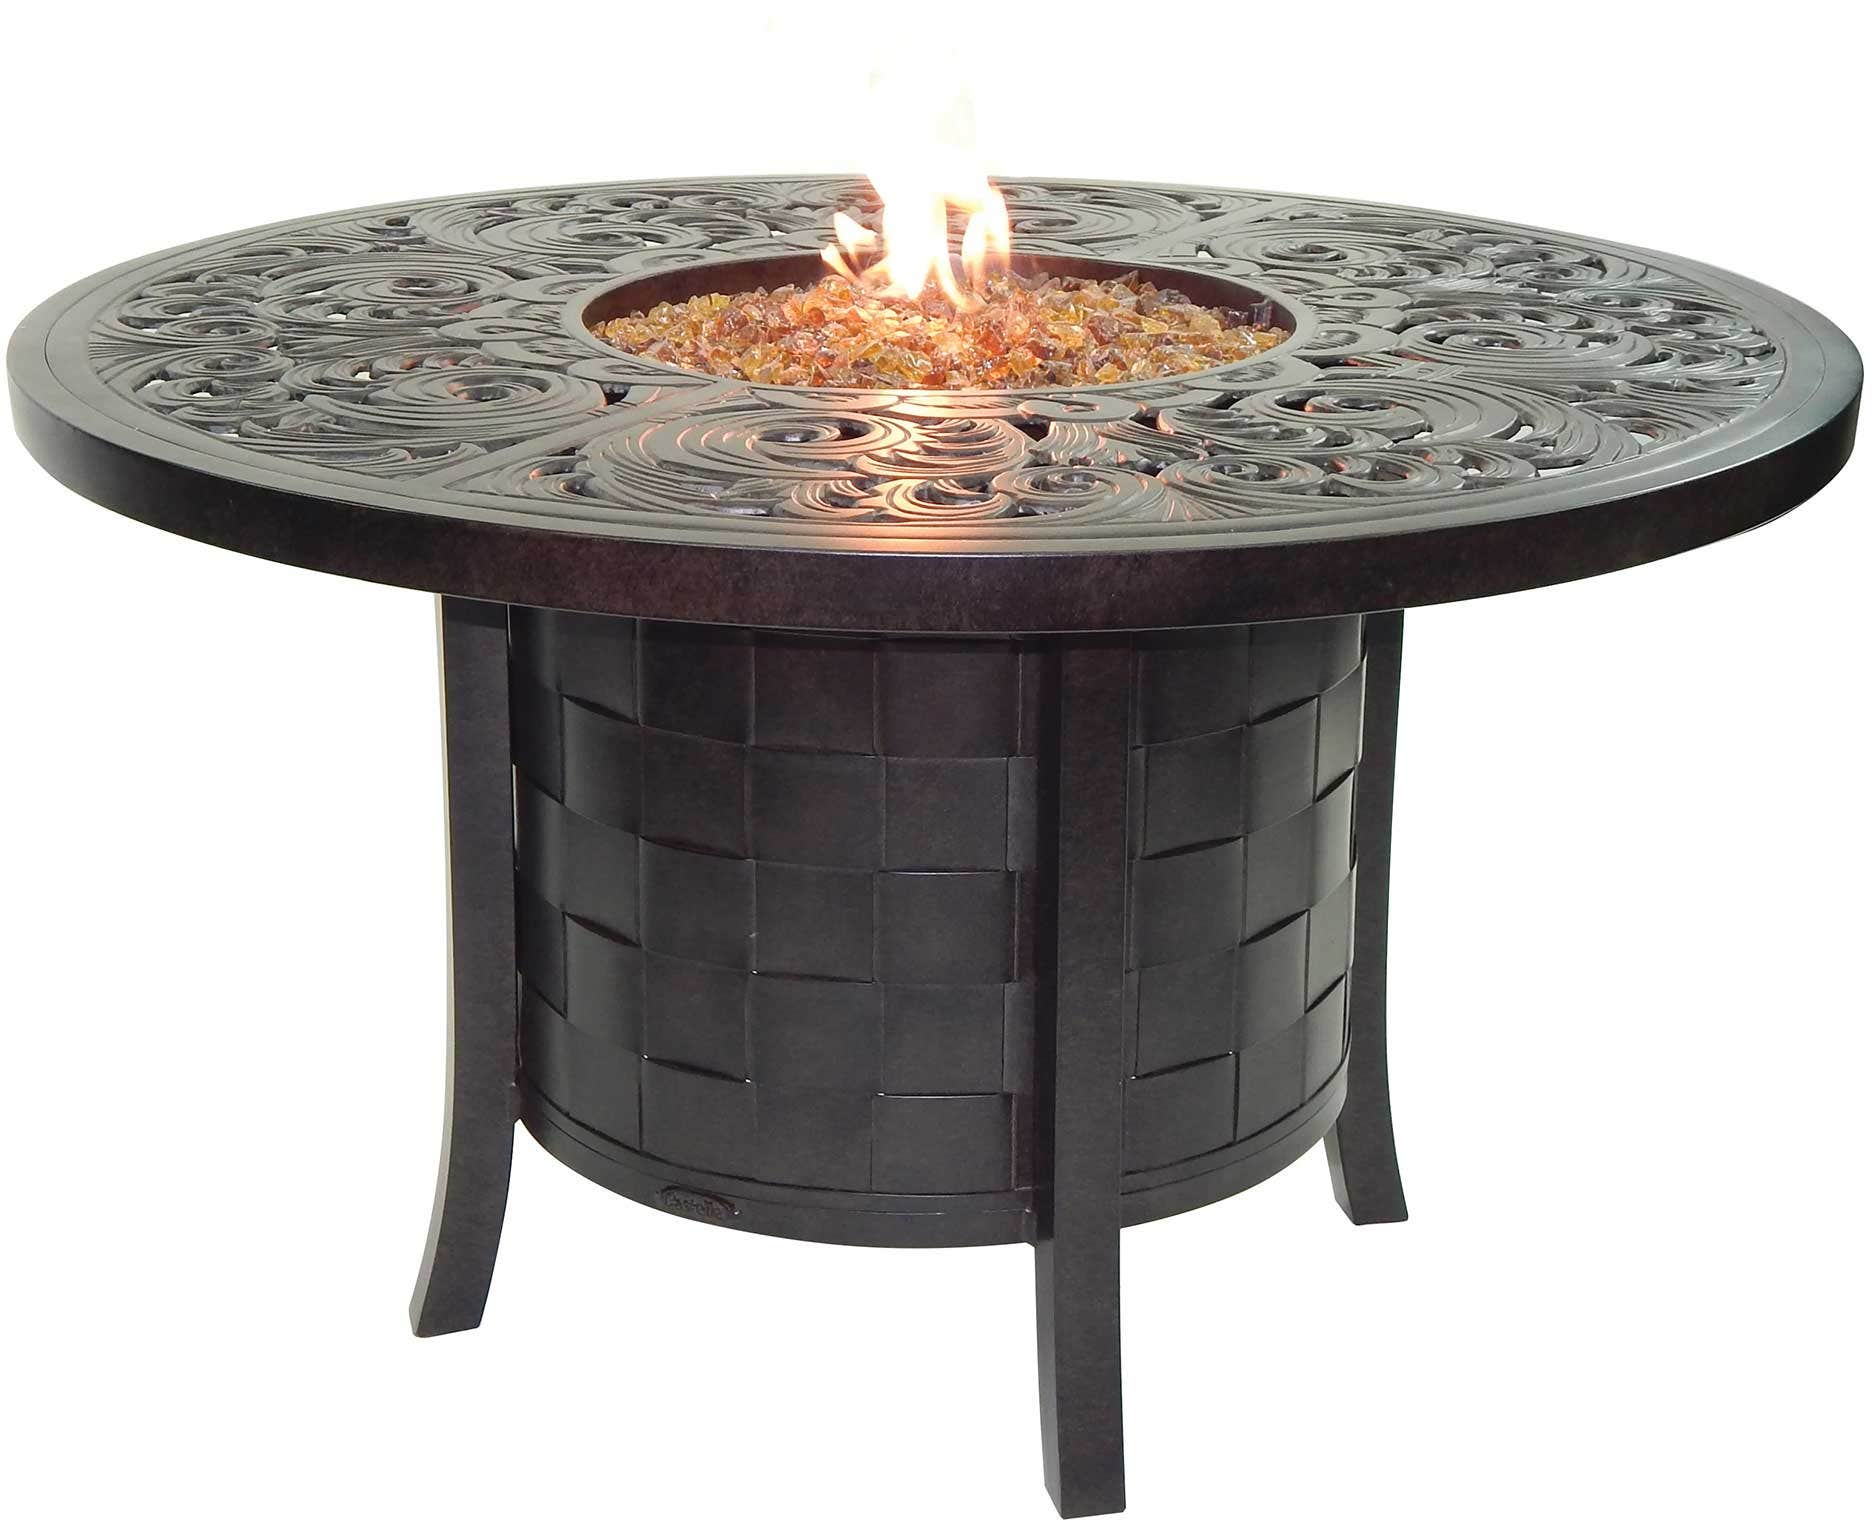 Castelle Classical 49 inch Round Fire Pit Dining Table with Live Edge Driftwood Top and Antique Dark Rum Finish Outdoor Tables 12026551